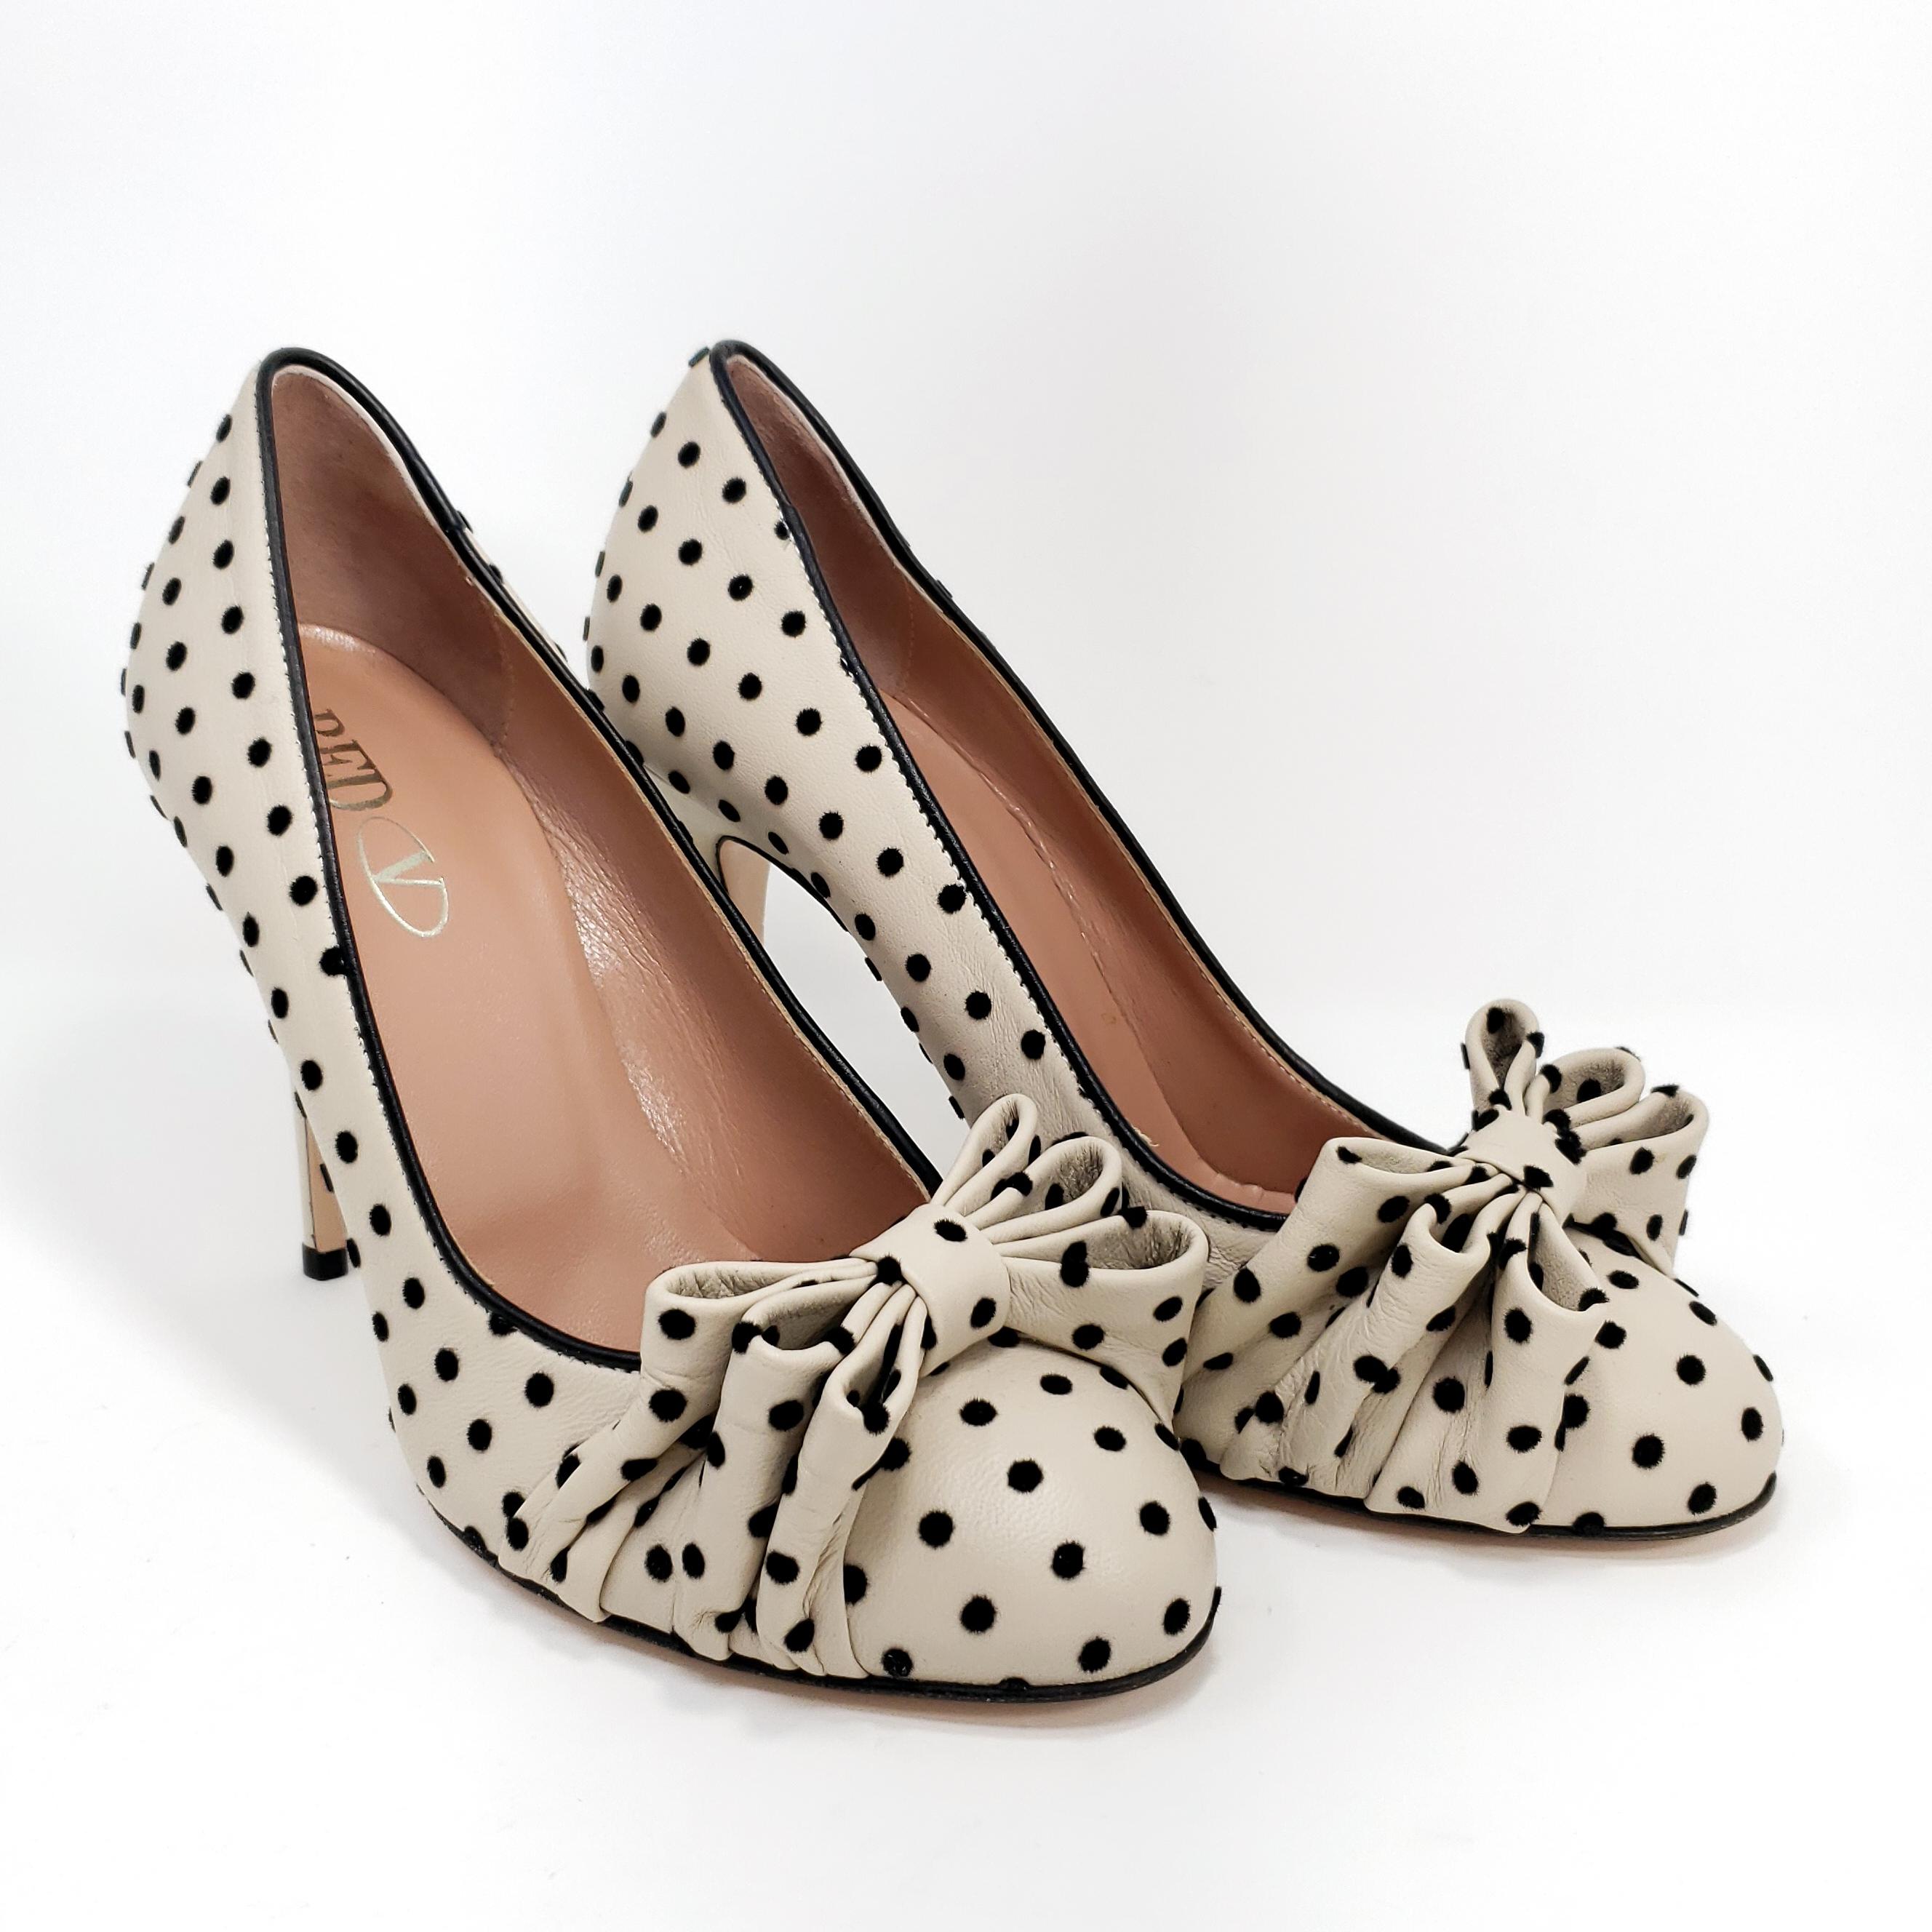 Valentino Red Slip On Stiletto Bow and Polka Dot Heels.

These pumps feature fabric polka-dots on cream-colored genuine leather.

Heel height: 3.5 in / 9 cm

EU Size 38. 

Genuine leather, made in Italy.

Gently worn once or twice,  with natural